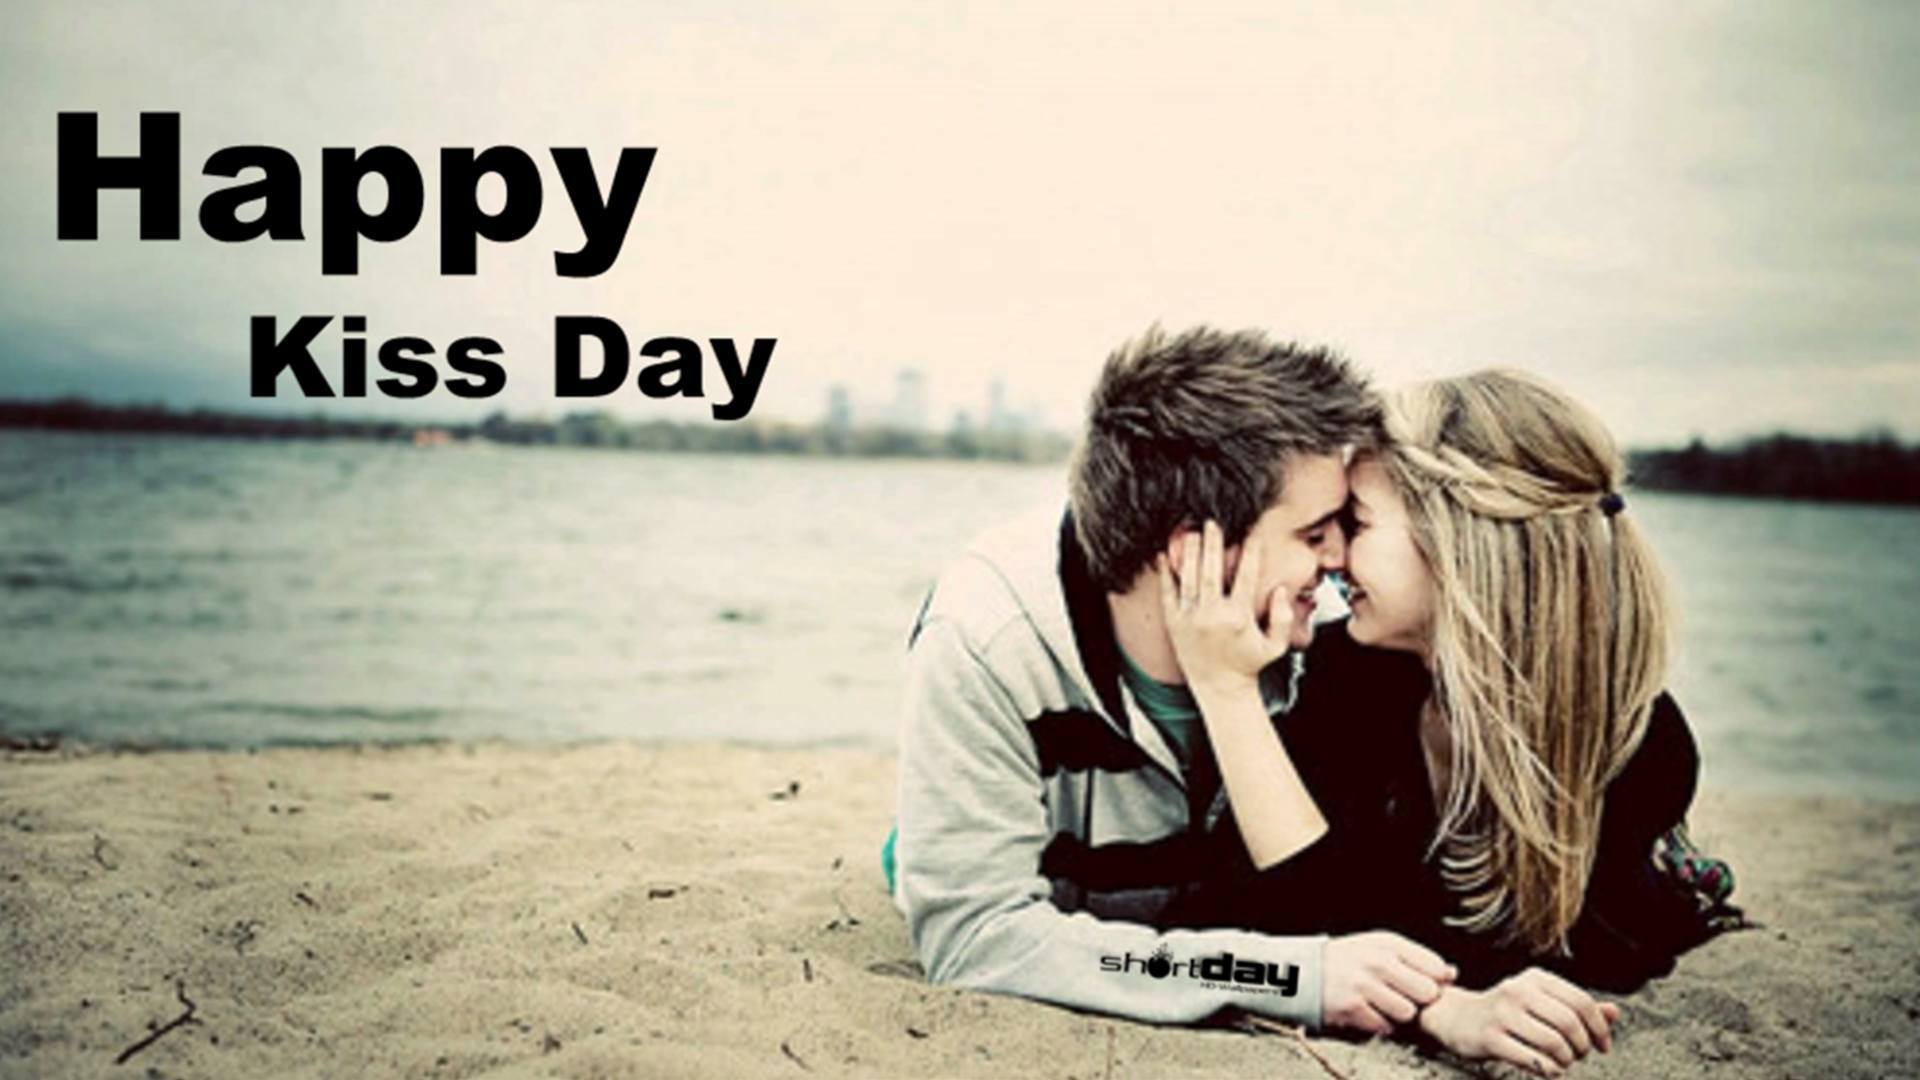 Romantic Message For Kiss Day